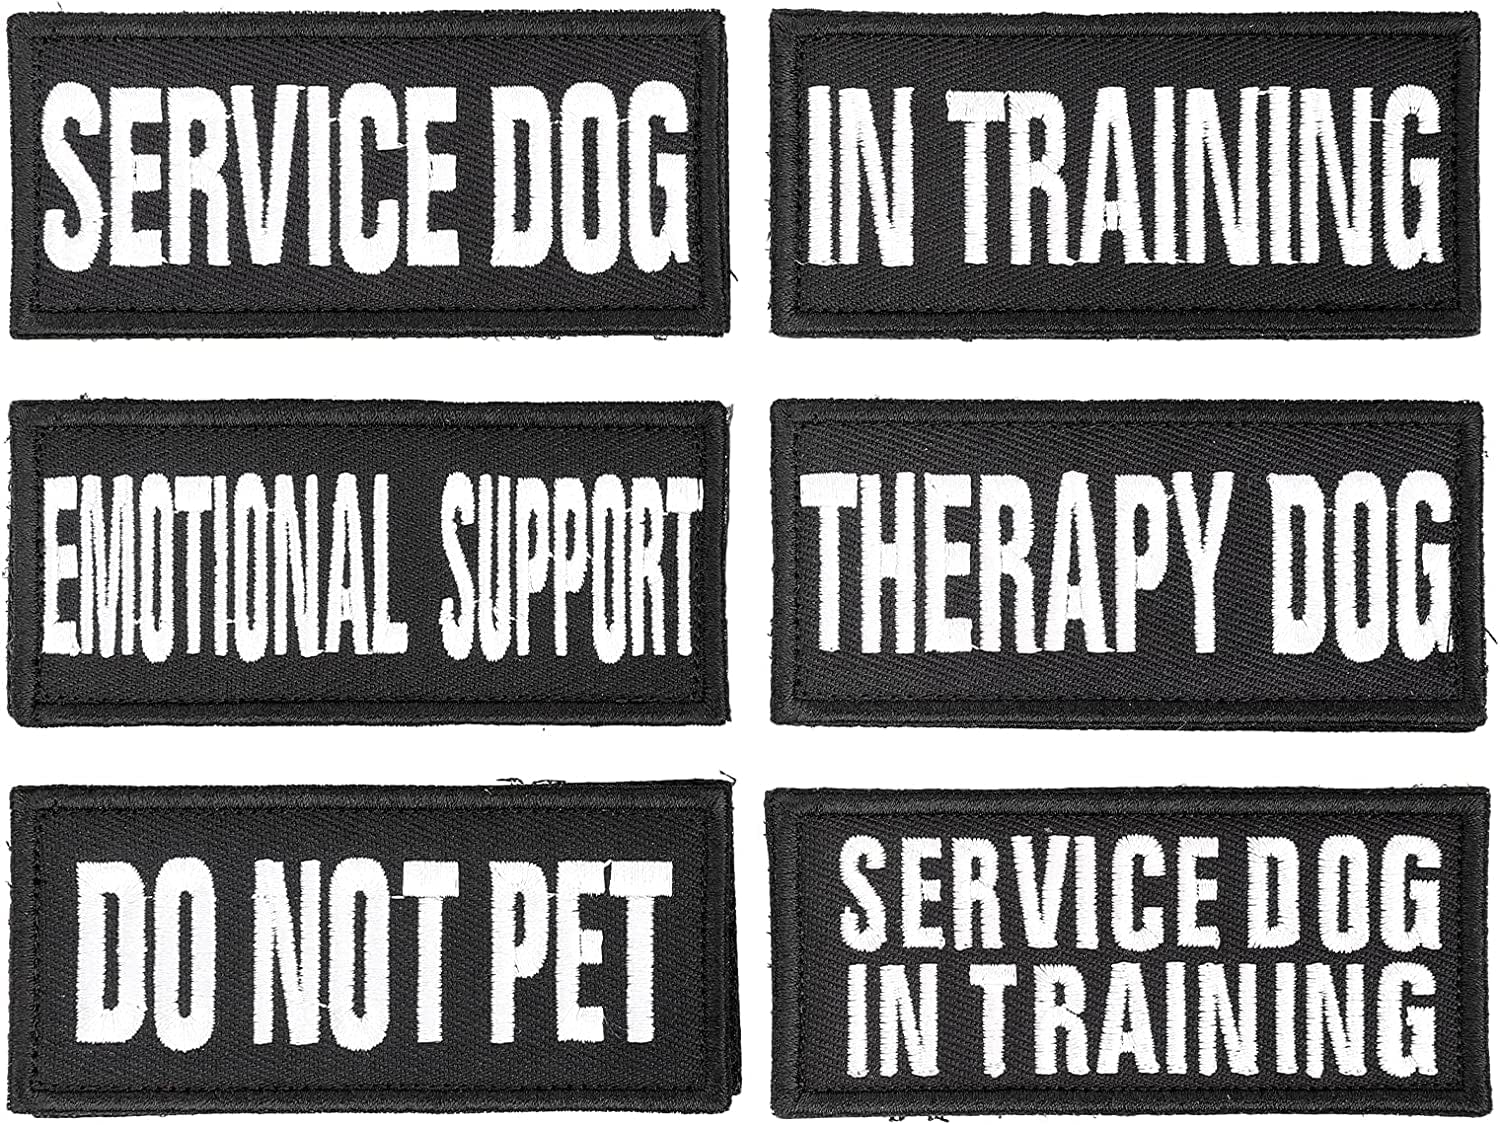 24 Pieces Service Dog Patch with Hook Backing Dog Vest Patches Service Dog  in Training Patch Reflective Dog Patches for Harness Service Animal Do Not